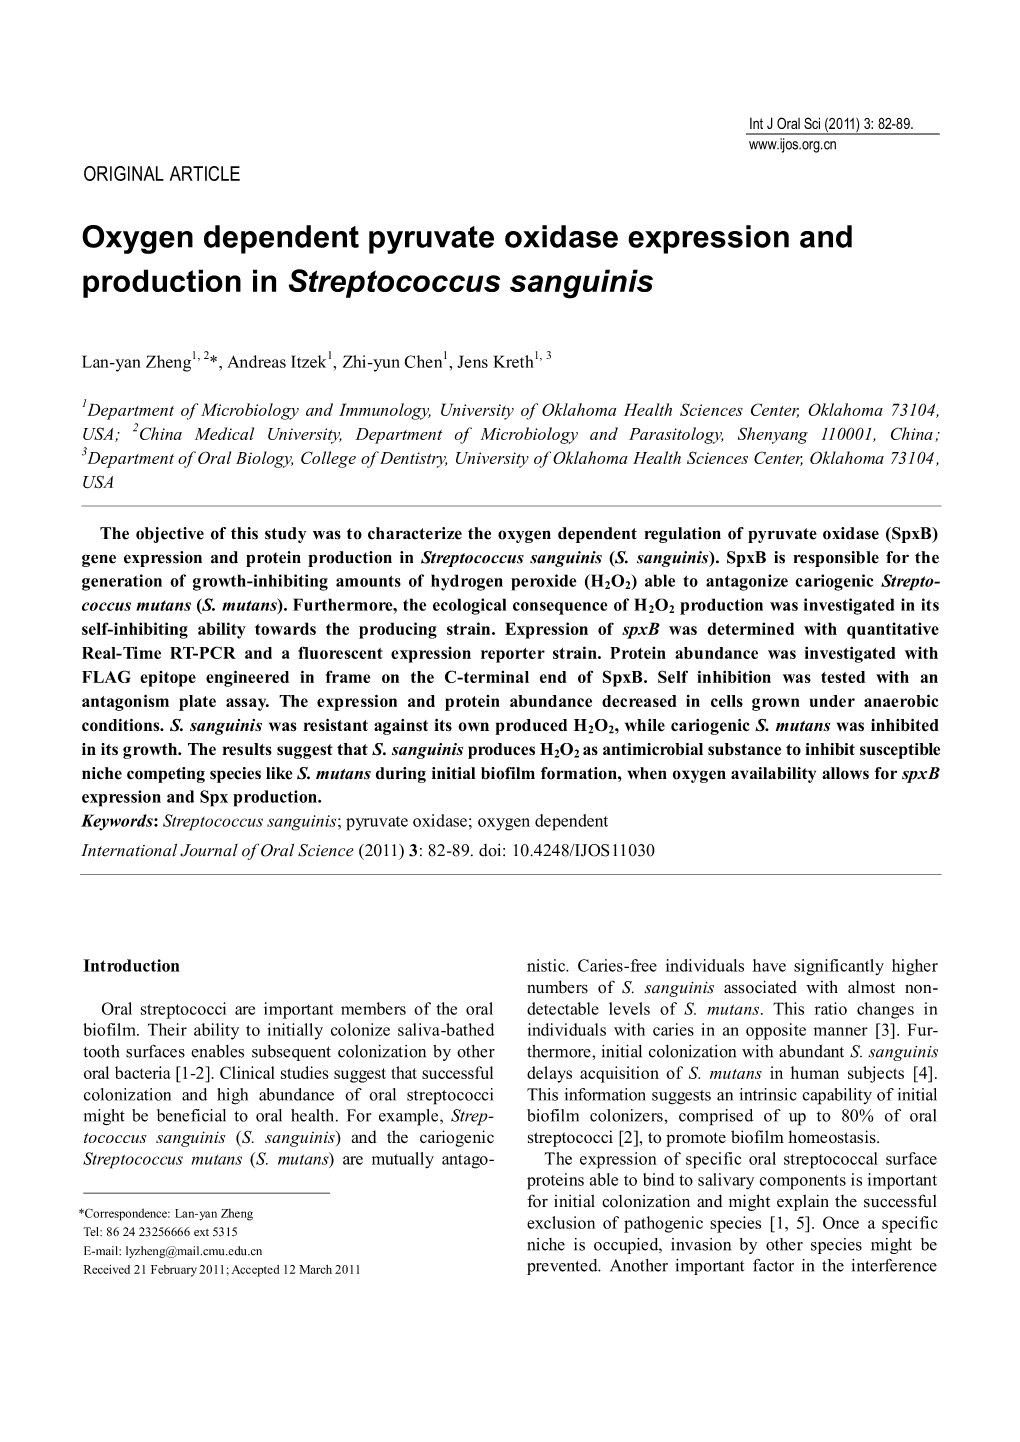 Oxygen Dependent Pyruvate Oxidase Expression and Production in Streptococcus Sanguinis